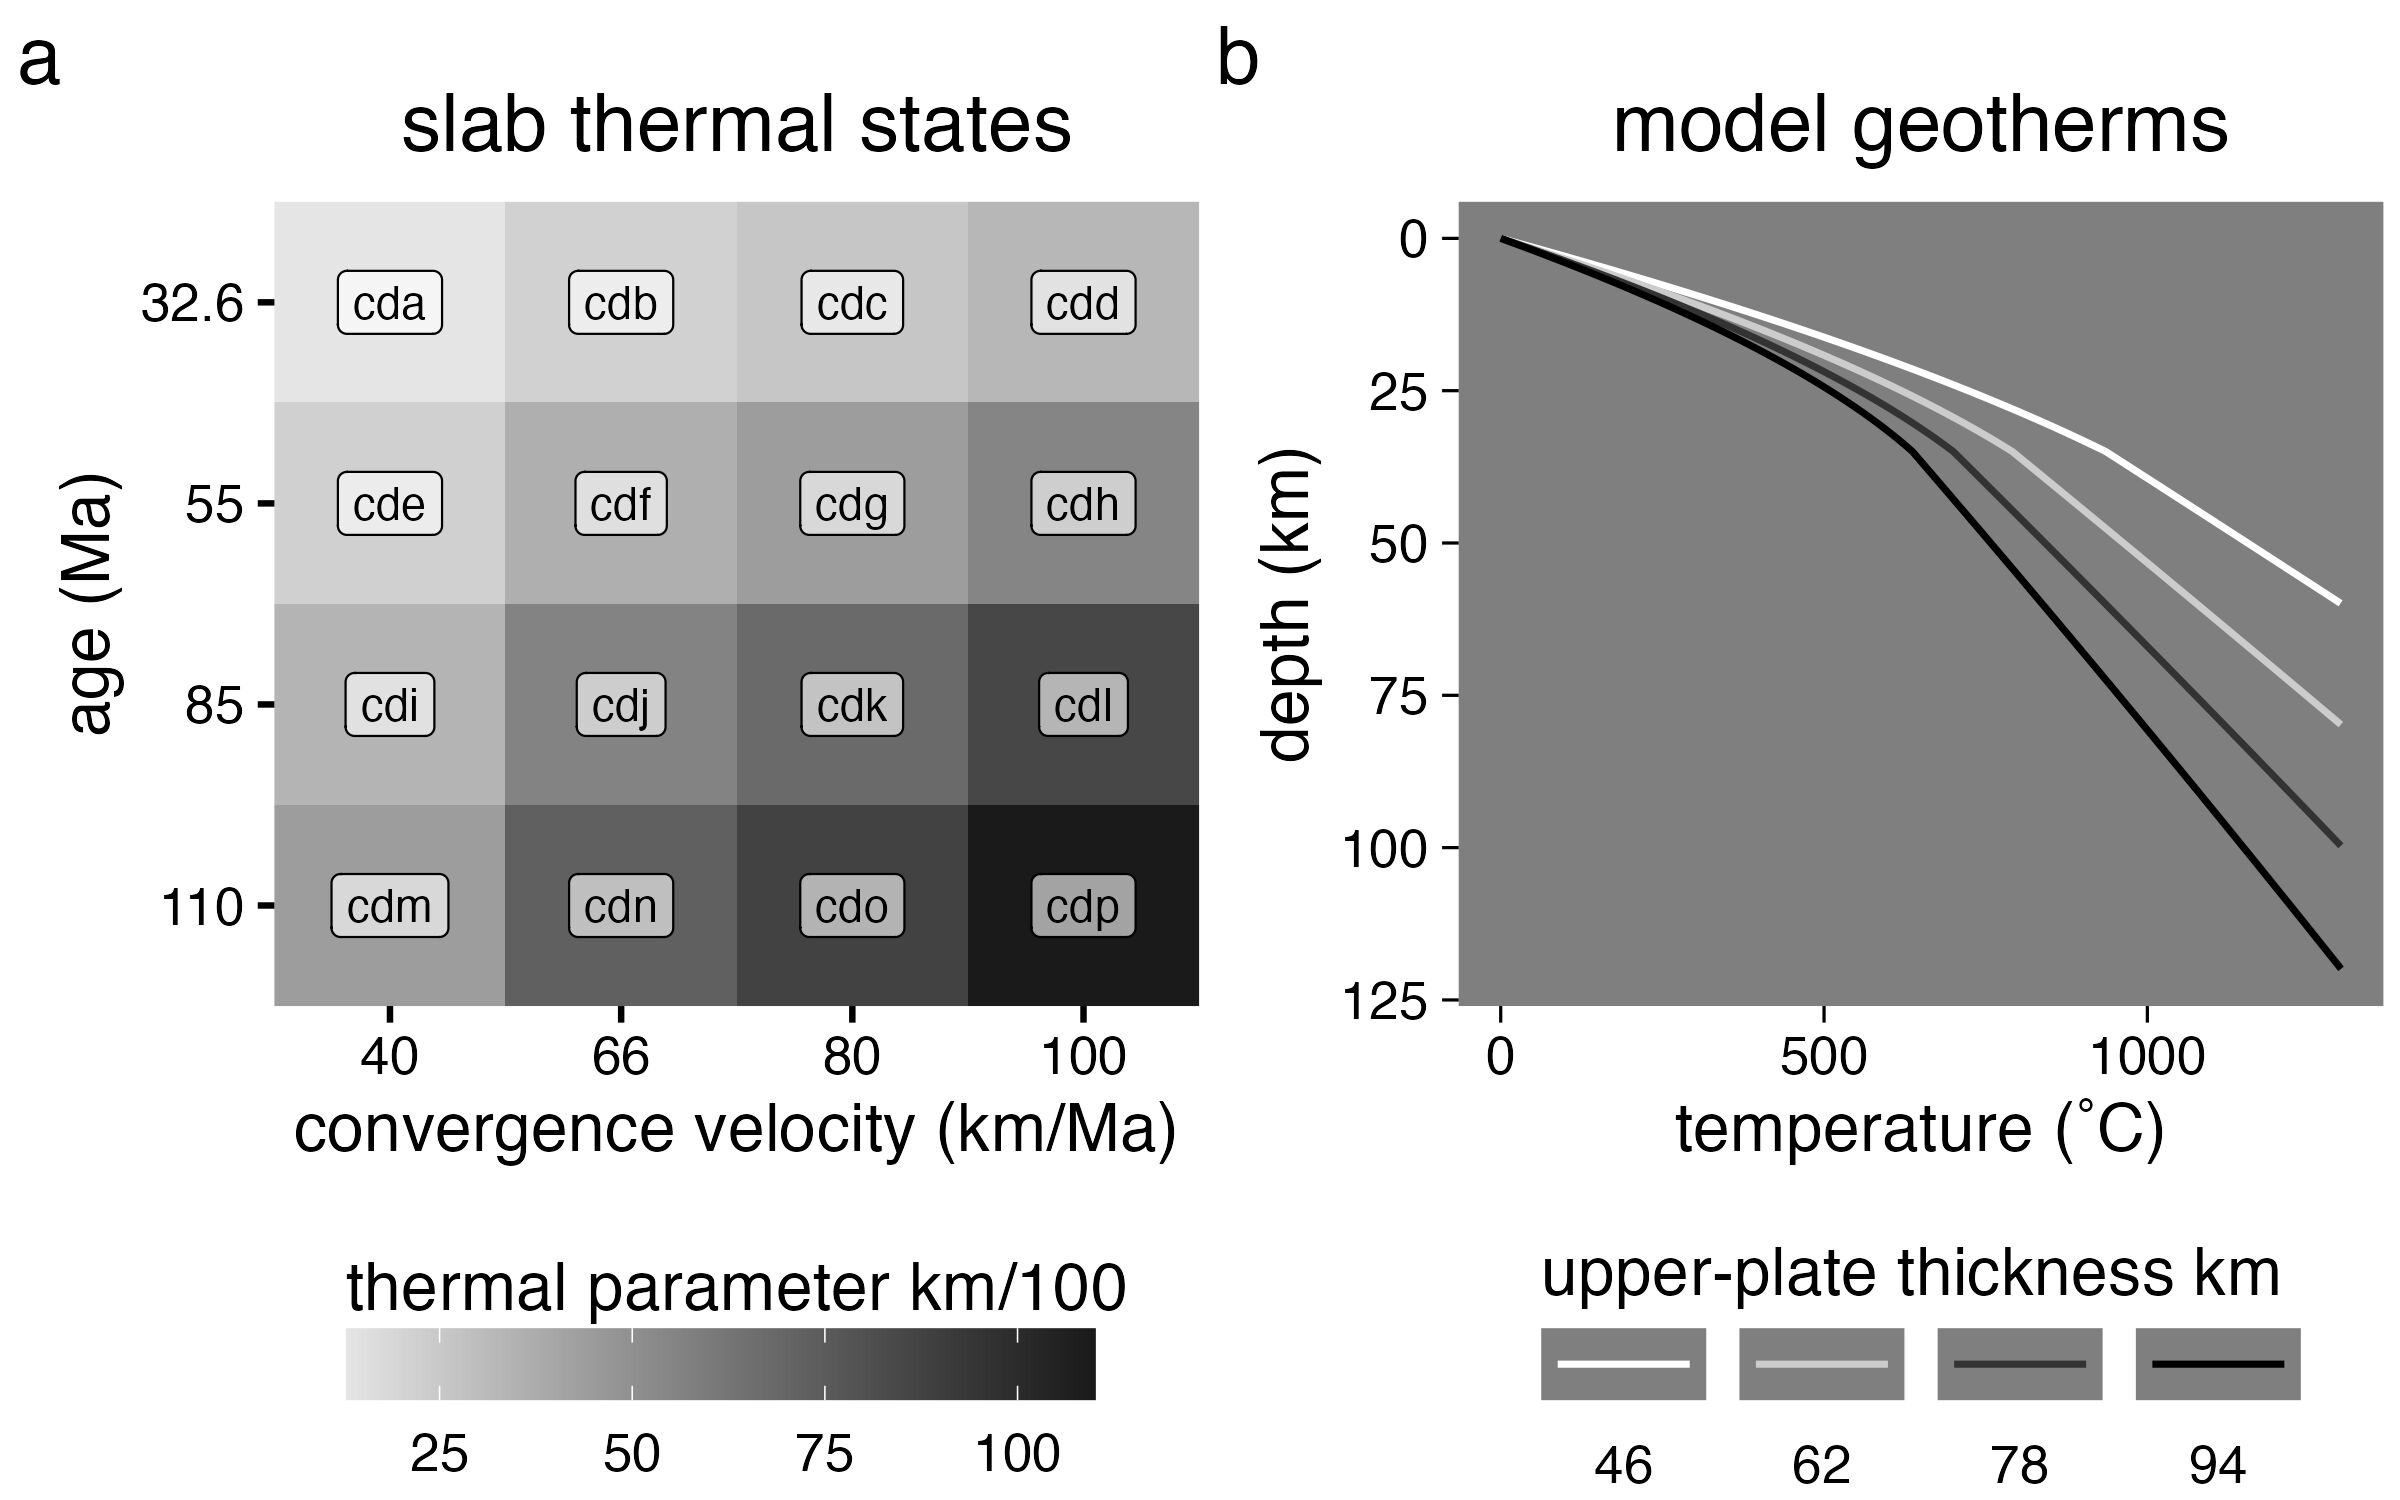 Range of thermo-kinematic boundary conditions used in numerical experiments. (a) Thermal parameters (grayscale) range from 13 to 110 km/100 and broadly reflect the distribution of oceanic plate ages and convergence velocities in modern subduction zones. Model names include the prefix “cd” for “coupling depth” with increasing alphabetic suffixes. Note that neither axes are continuous. (b) Upper-plate thickness (\(Z_{UP}\)) is defined by a range of continental geotherms. Geotherms were constructed using a one-dimensional steady-state conductive cooling model with T(z=0) = 0 ˚C, \(\vec{q}\)(z=0) = 59, 63, 69, 79 mW/m\(^2\), and constant radiogenic heating of 1.0 \(\mu\)W/m\(^3\) for a 35 km-thick crust and 0.022 \(\mu\)W/m\(^3\) for the mantle. Continental geotherms are calculated up to 1300 ˚C with a constant 0.5 ˚C/km gradient (the mantle adiabat) extending to the base of the model domain.